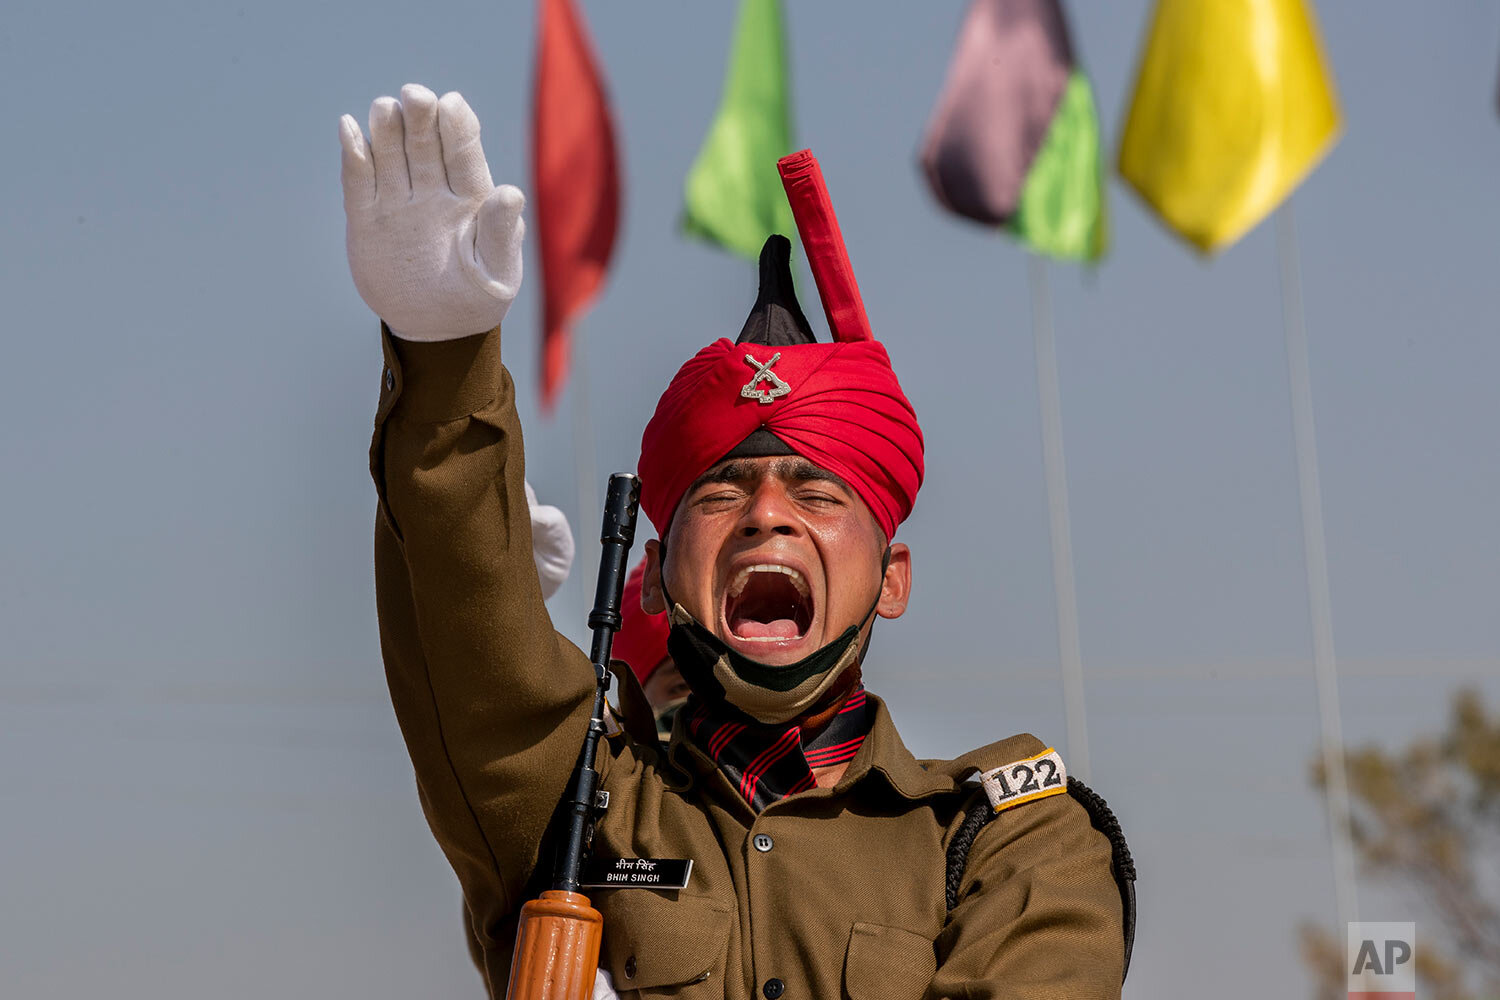  A soldier of the Jammu and Kashmir Light Infantry takes oath during a graduation ceremony at a military base on the outskirts of Srinagar, Indian controlled Kashmir, Saturday, Oct. 10, 2020.  (AP Photo/ Dar Yasin) 